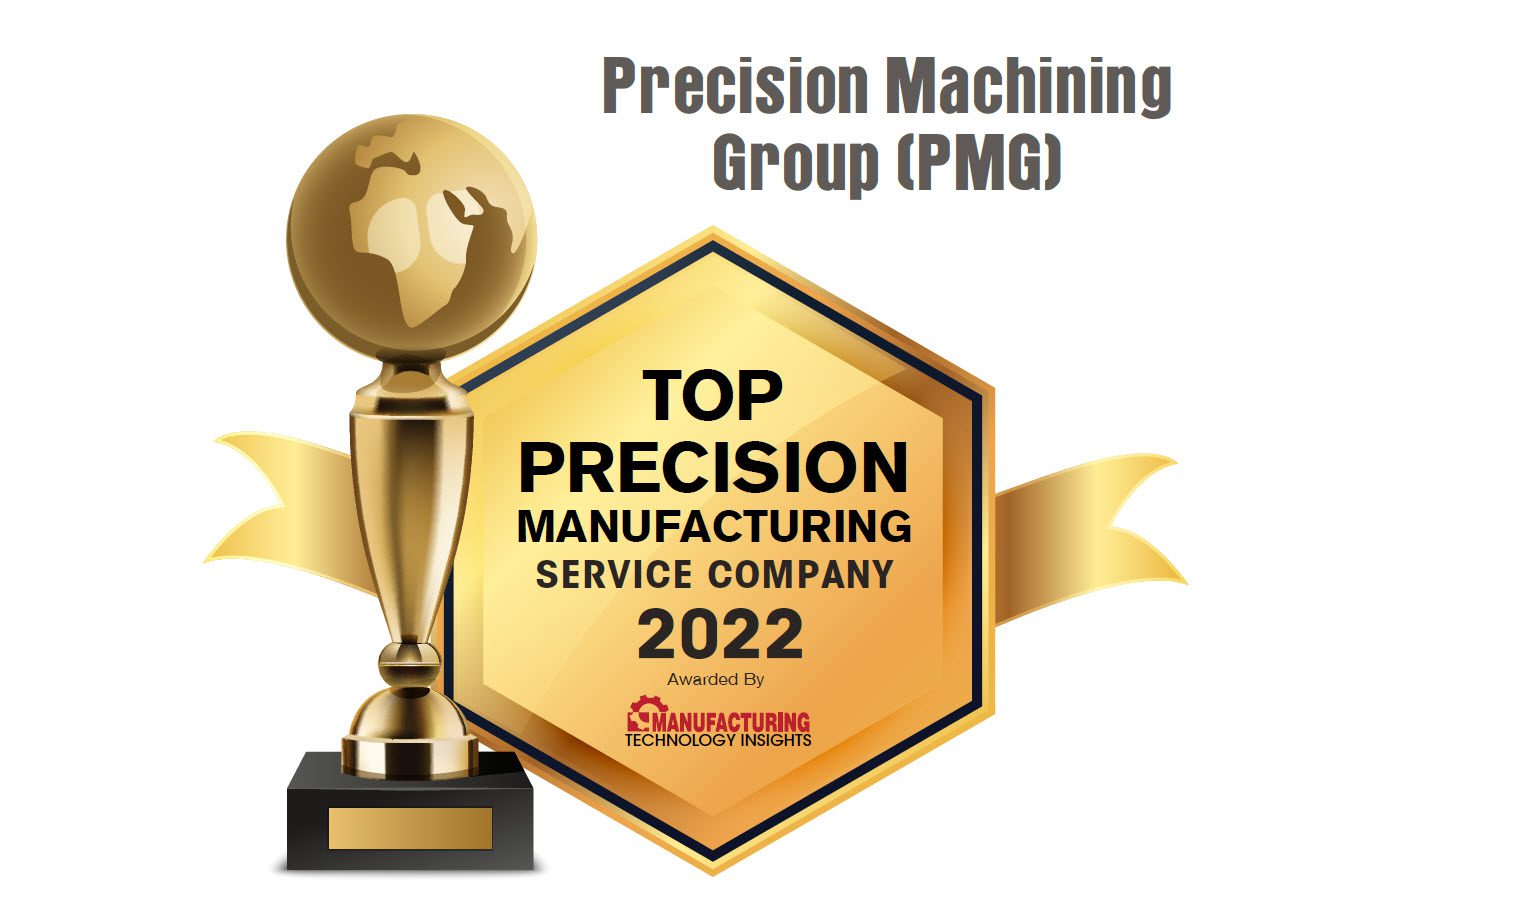 Awarded TOP Precision Manufacturing Service Company in 2022 by Manufacturing Technology Insights